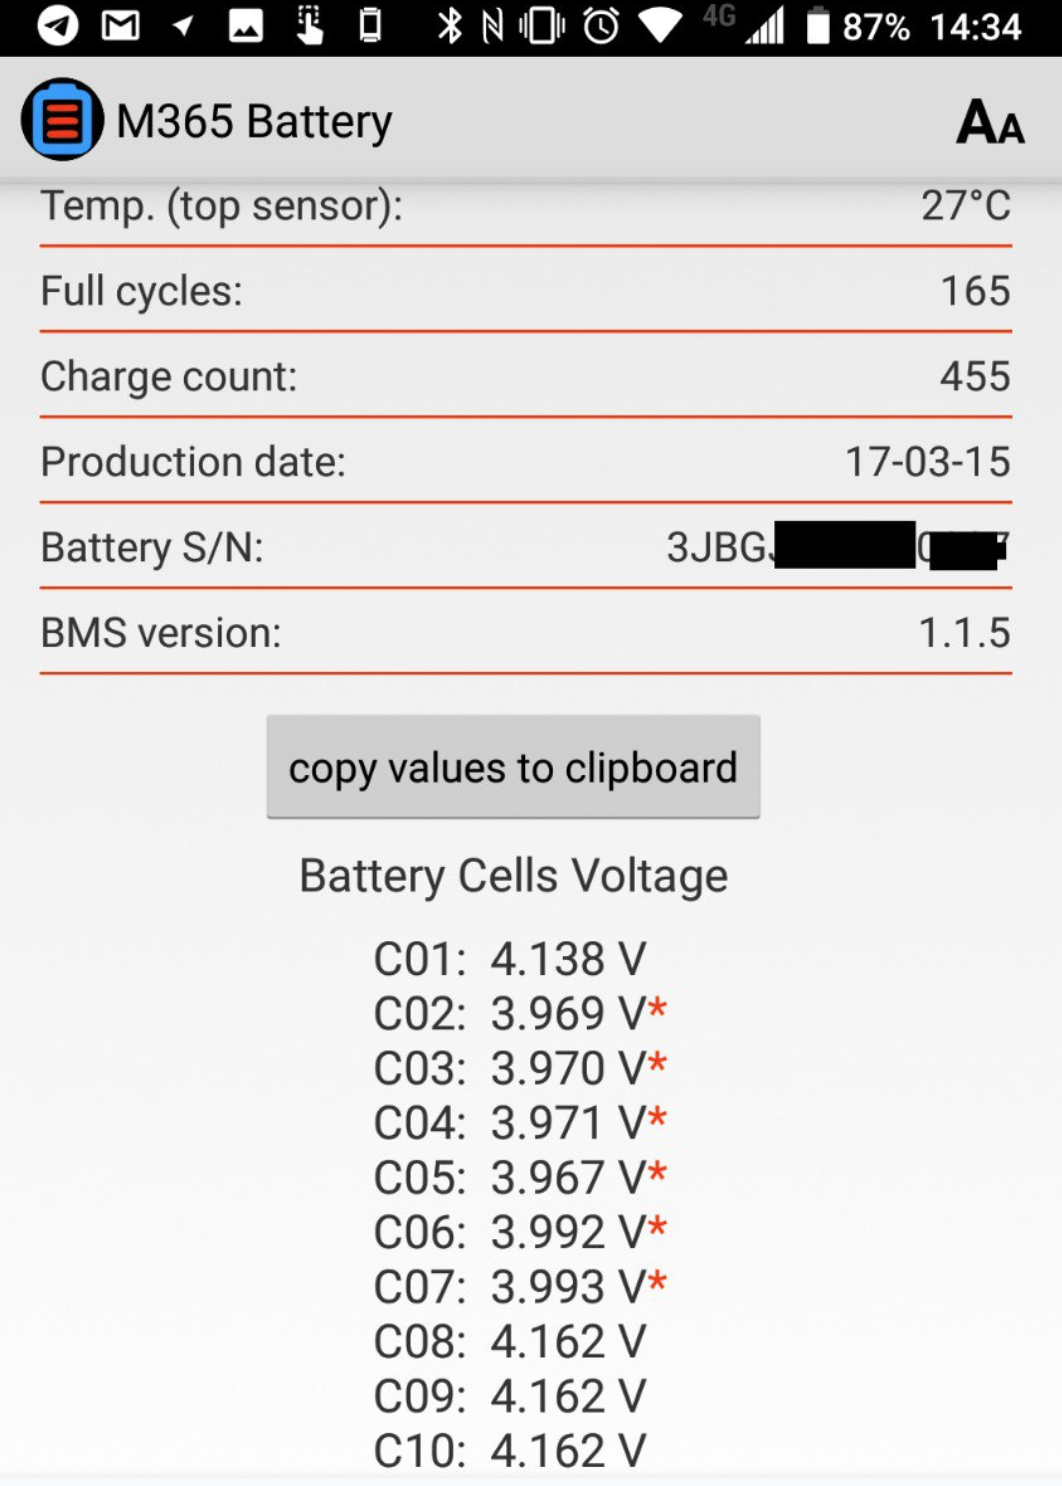 M365 Battery shows the state